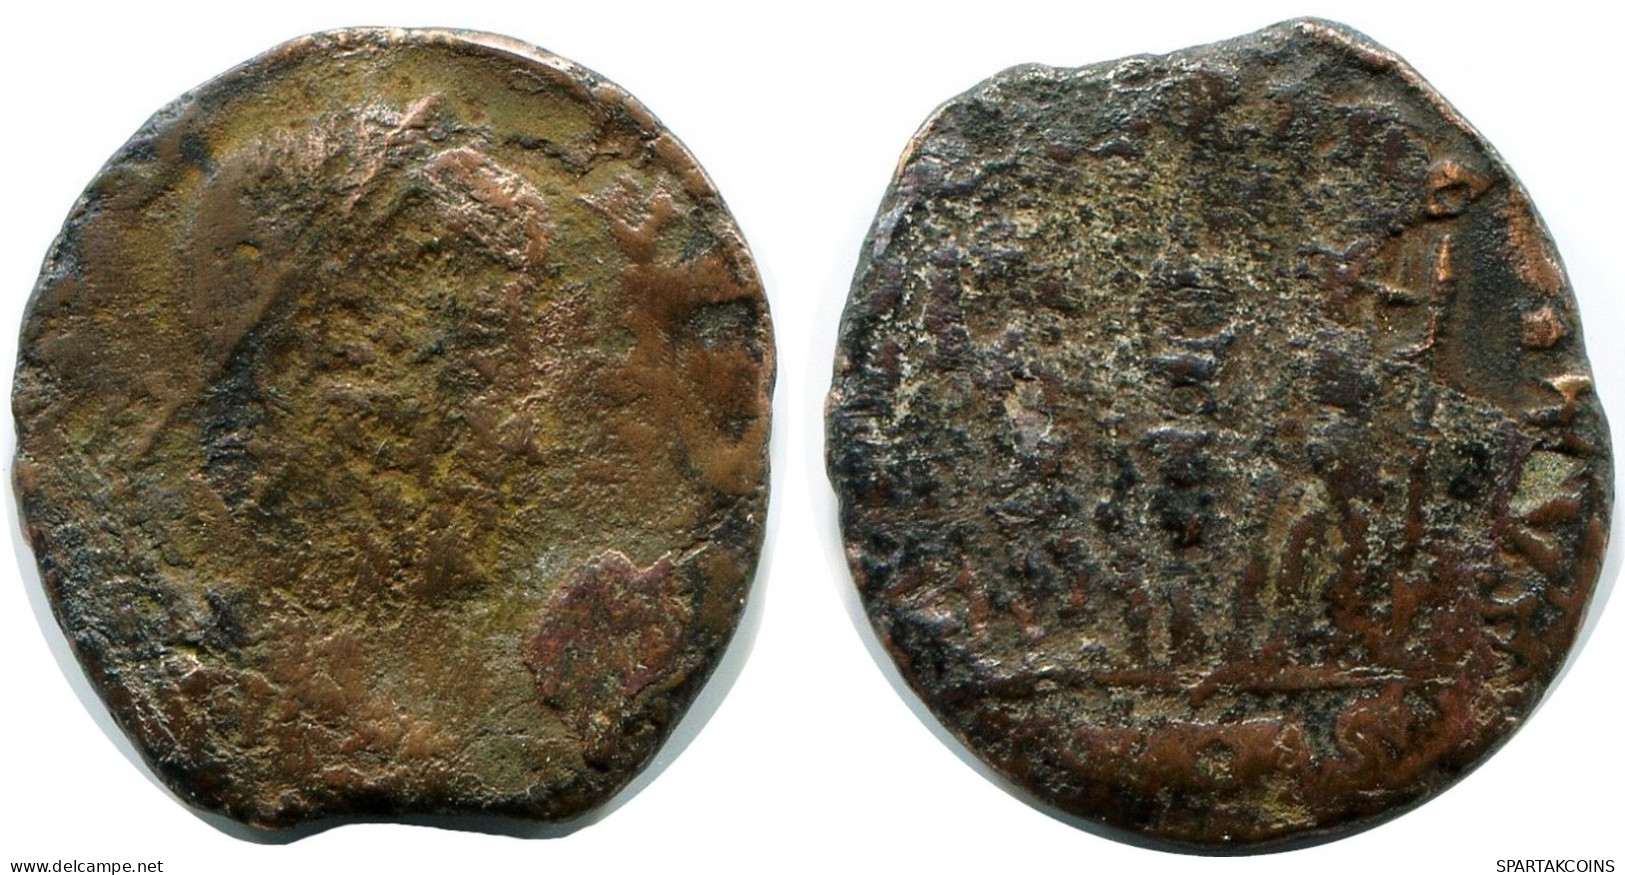 CONSTANS MINTED IN CYZICUS FOUND IN IHNASYAH HOARD EGYPT #ANC11677.14.D.A - El Impero Christiano (307 / 363)